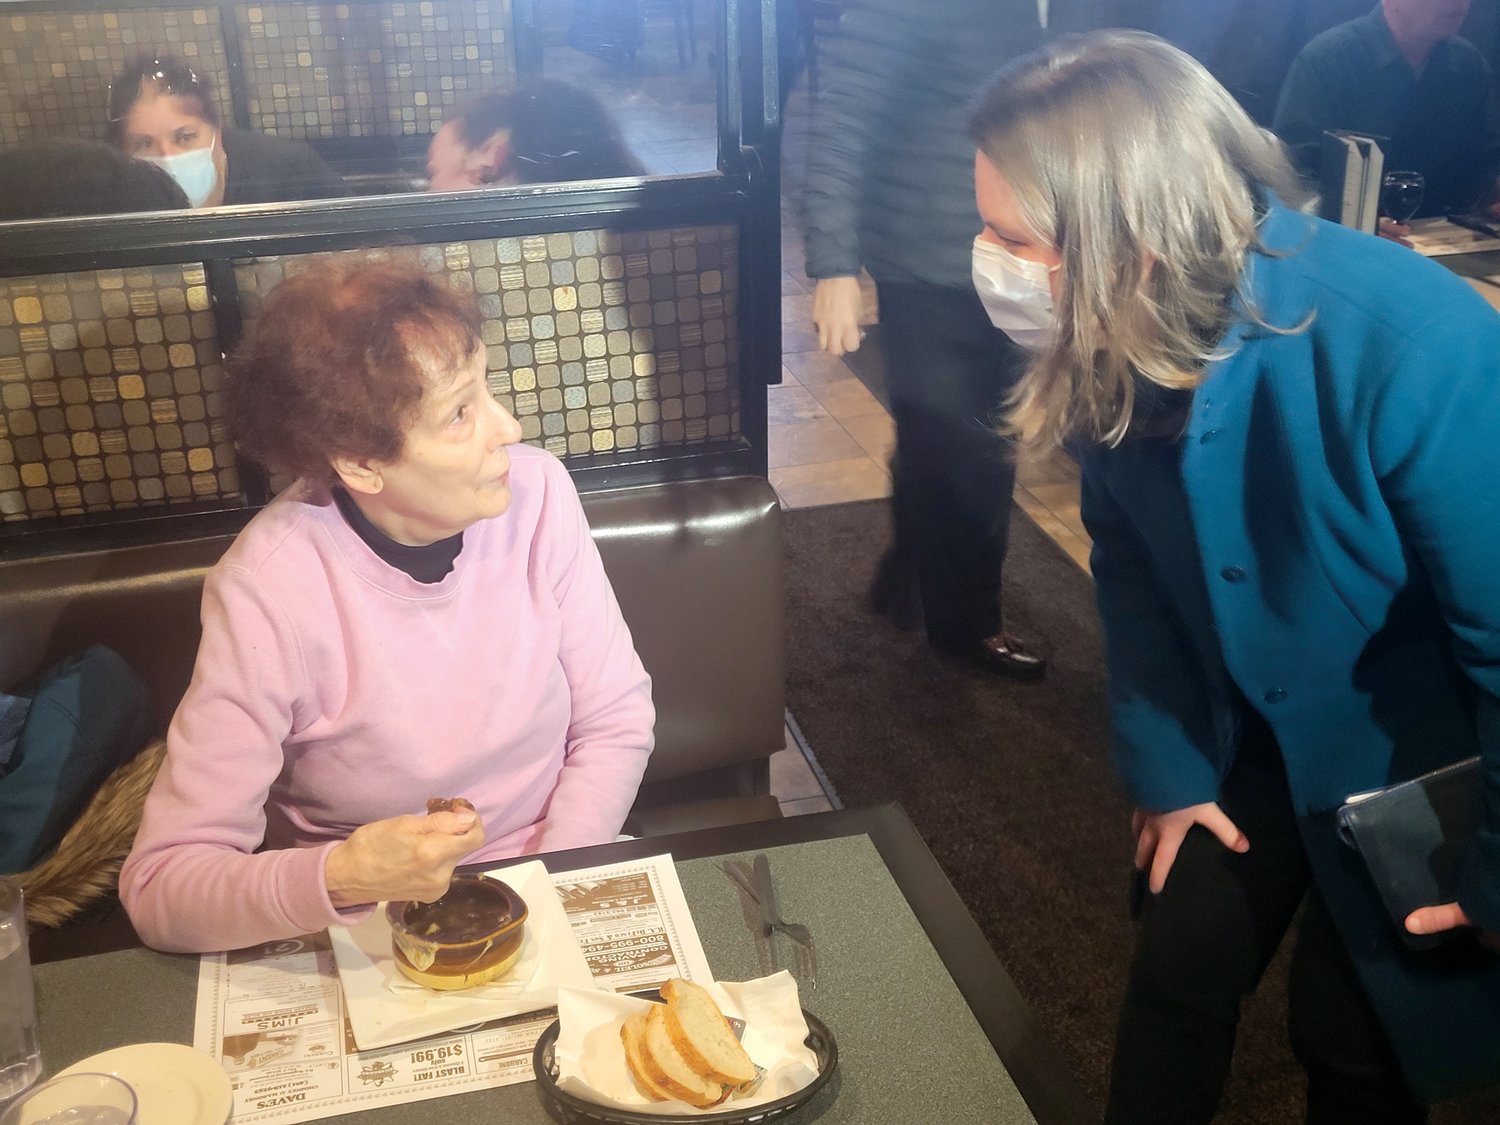 WE MEET AGAIN: Candidate Joy Fox and Atwood Grill patron Theresa Gambardelli remembered each other from long ago. Fox worked for Beacon Communications newspaper the Cranston Herald and Gambardelli worked for the Craston school department. (Sun Rise photo by Rory Schuler)